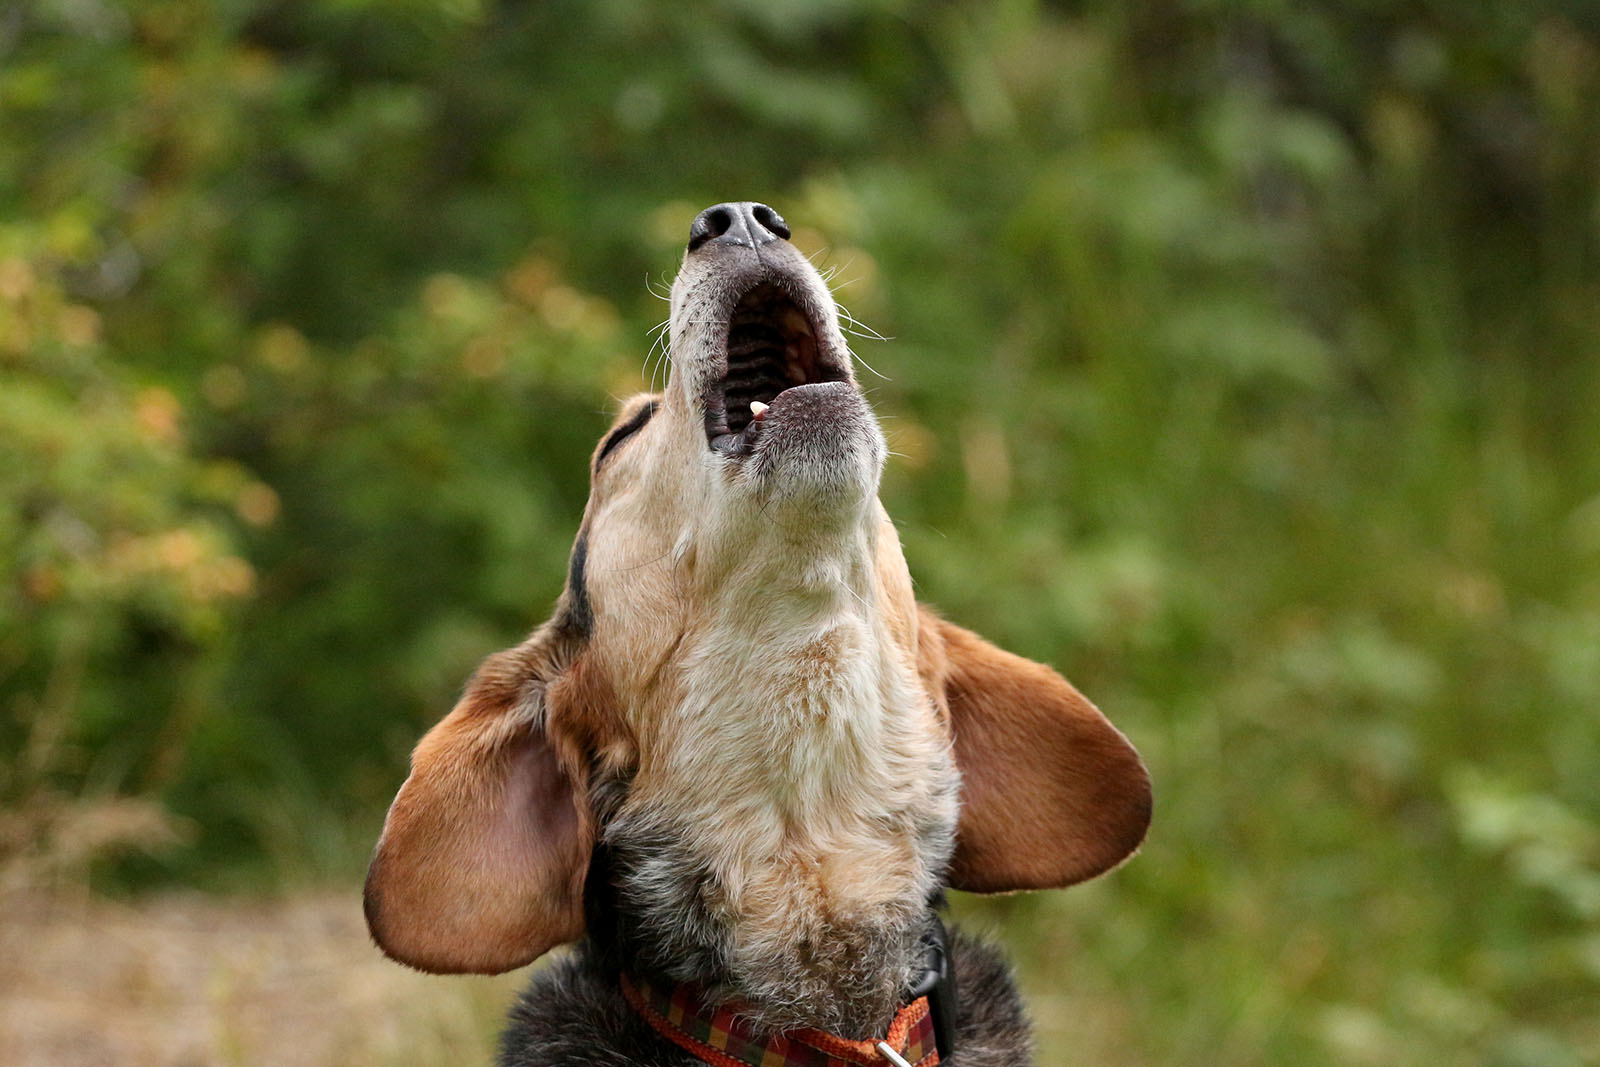 beagle howling with head back and ears flared